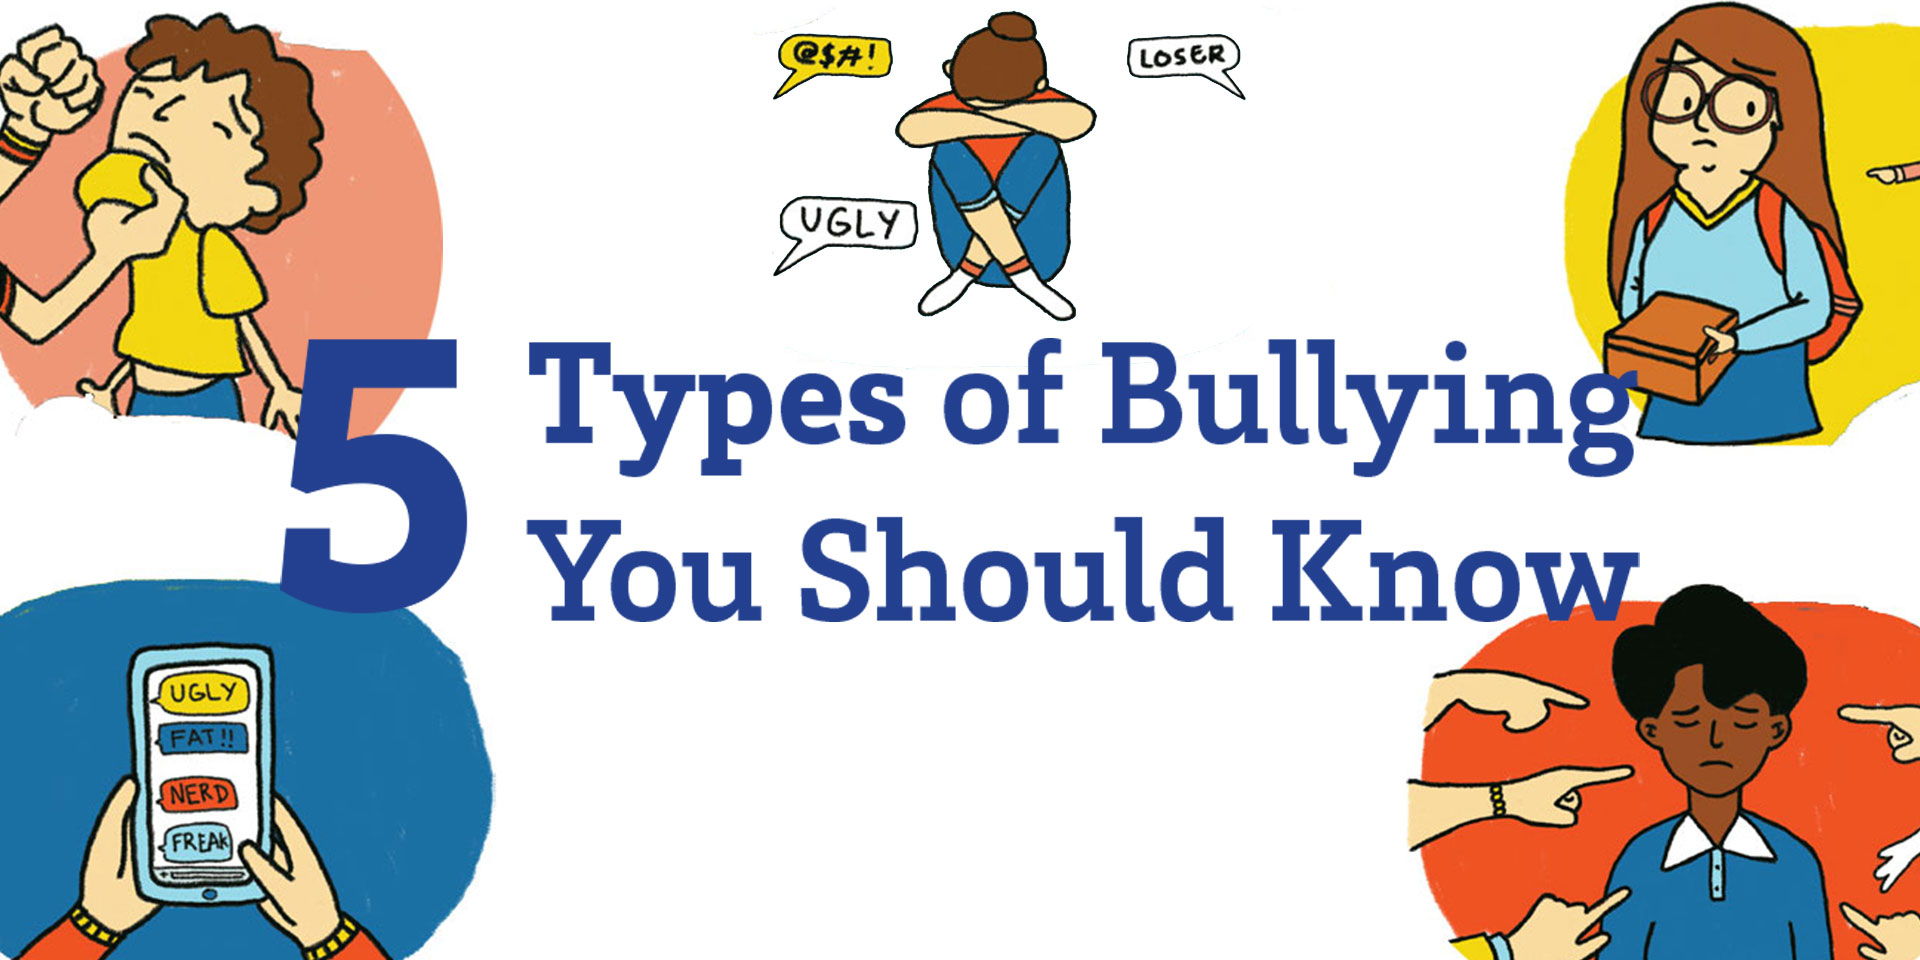 5 Types of Bullying You Should Know